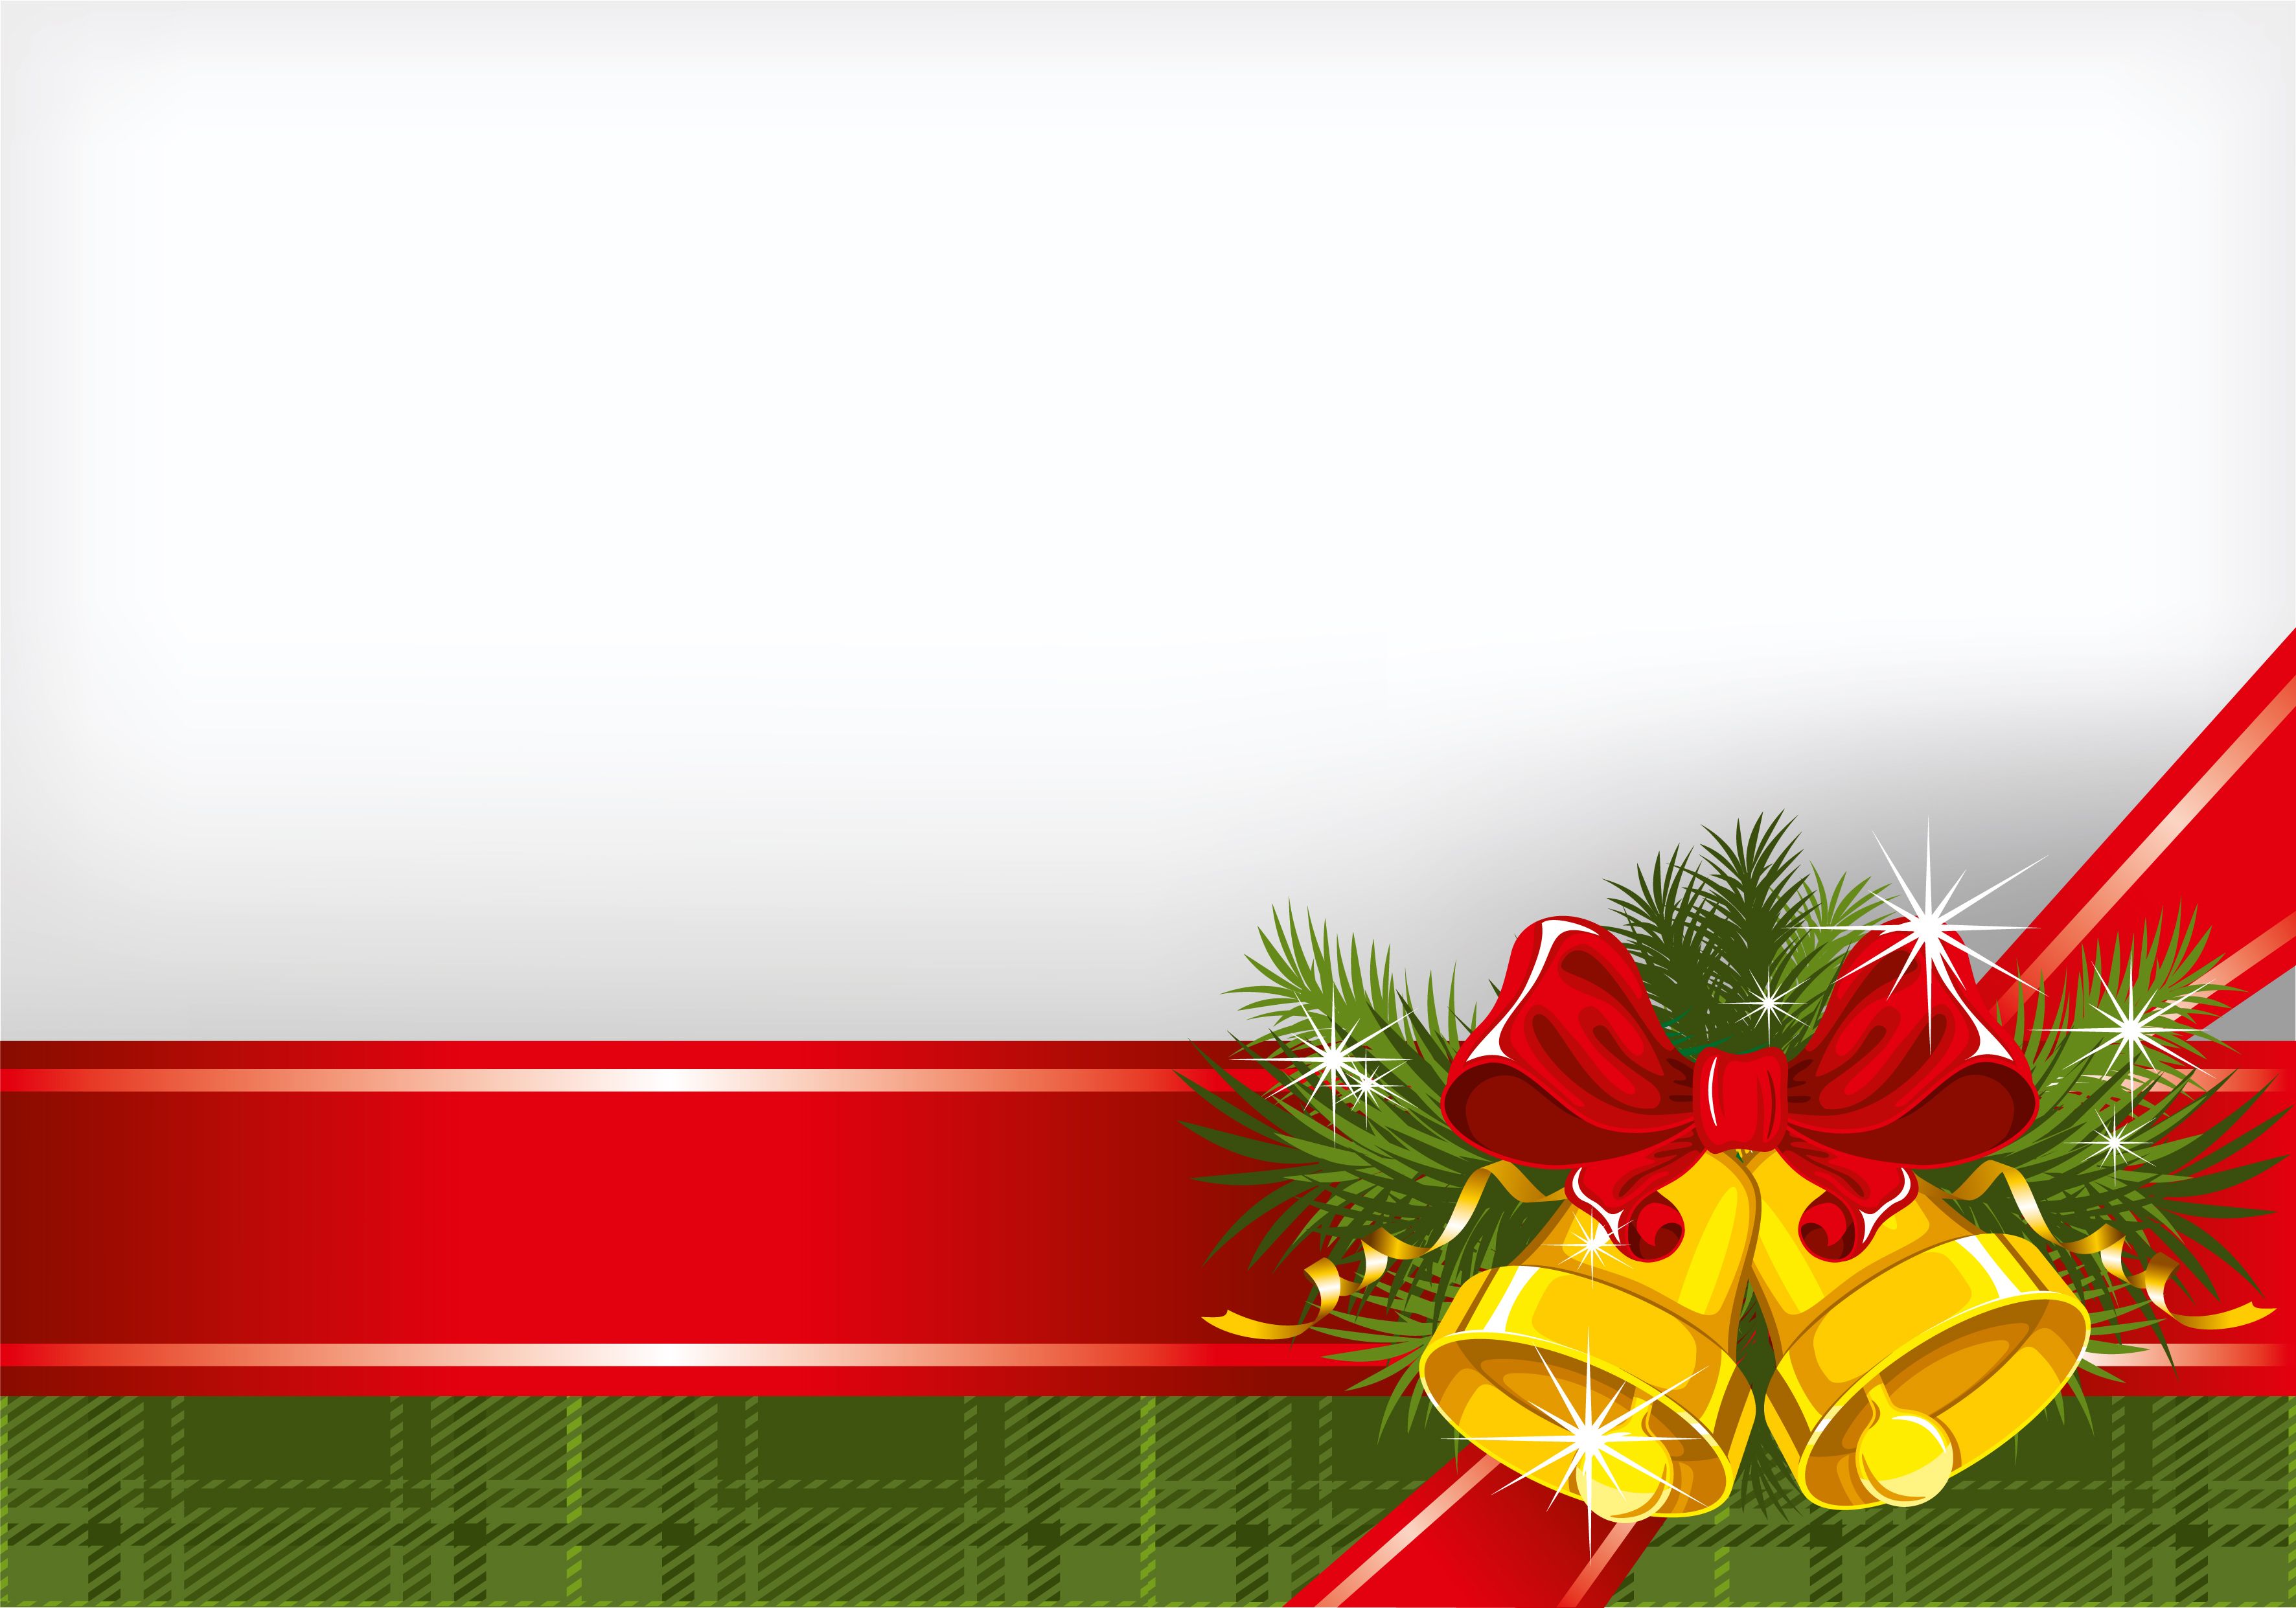 Free Christmas Vector Image, Download Free Clip Art, Free Clip Art on Clipart Library